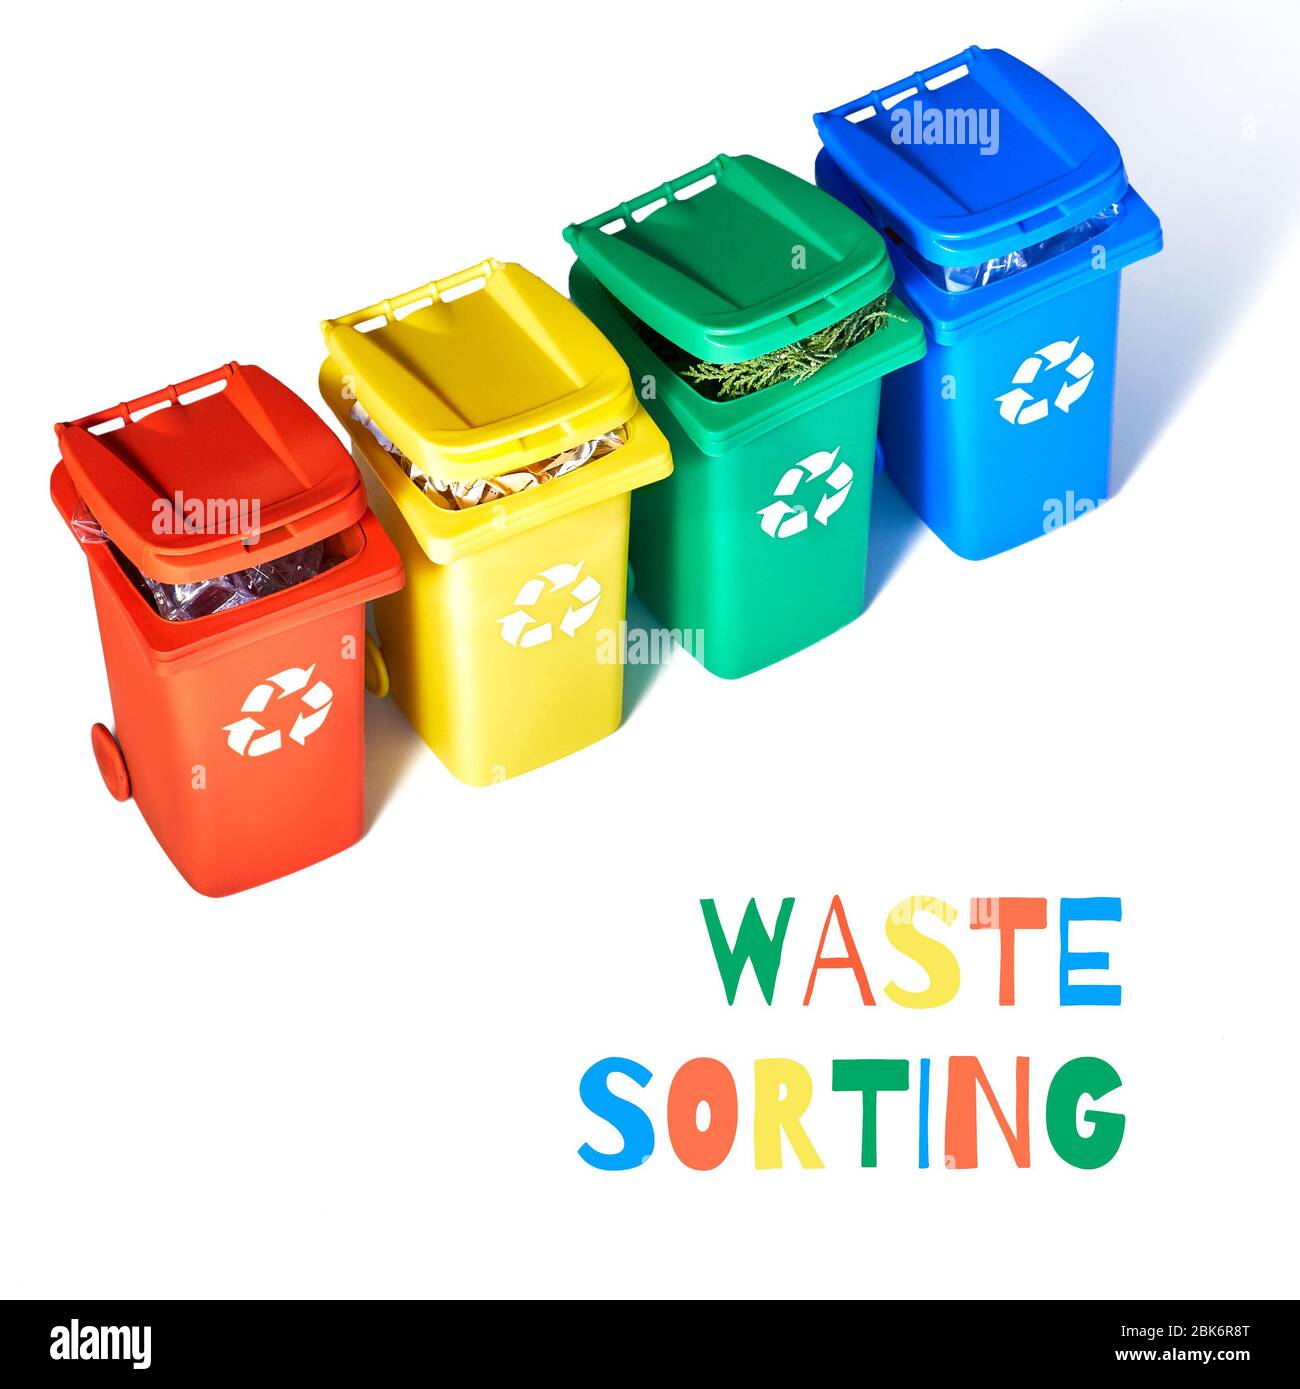 Four color coded recycle bins, isometric projection on white background, text 'Waste sorting'. Recycling sign on the bins - red, blue, yellow and gree Stock Photo